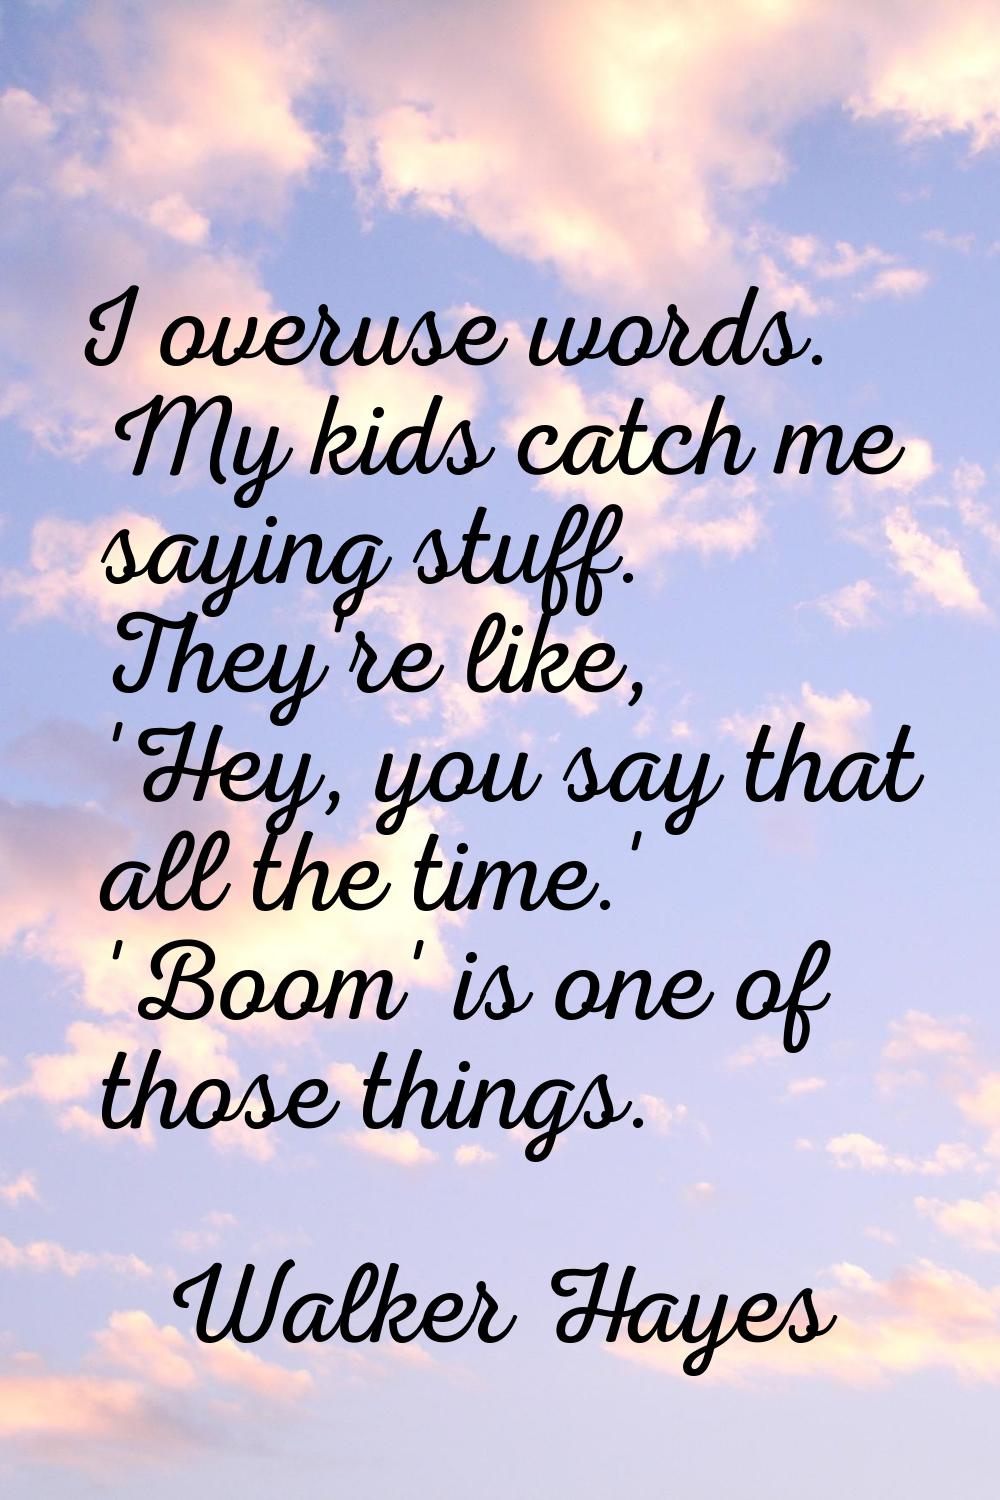 I overuse words. My kids catch me saying stuff. They're like, 'Hey, you say that all the time.' 'Bo